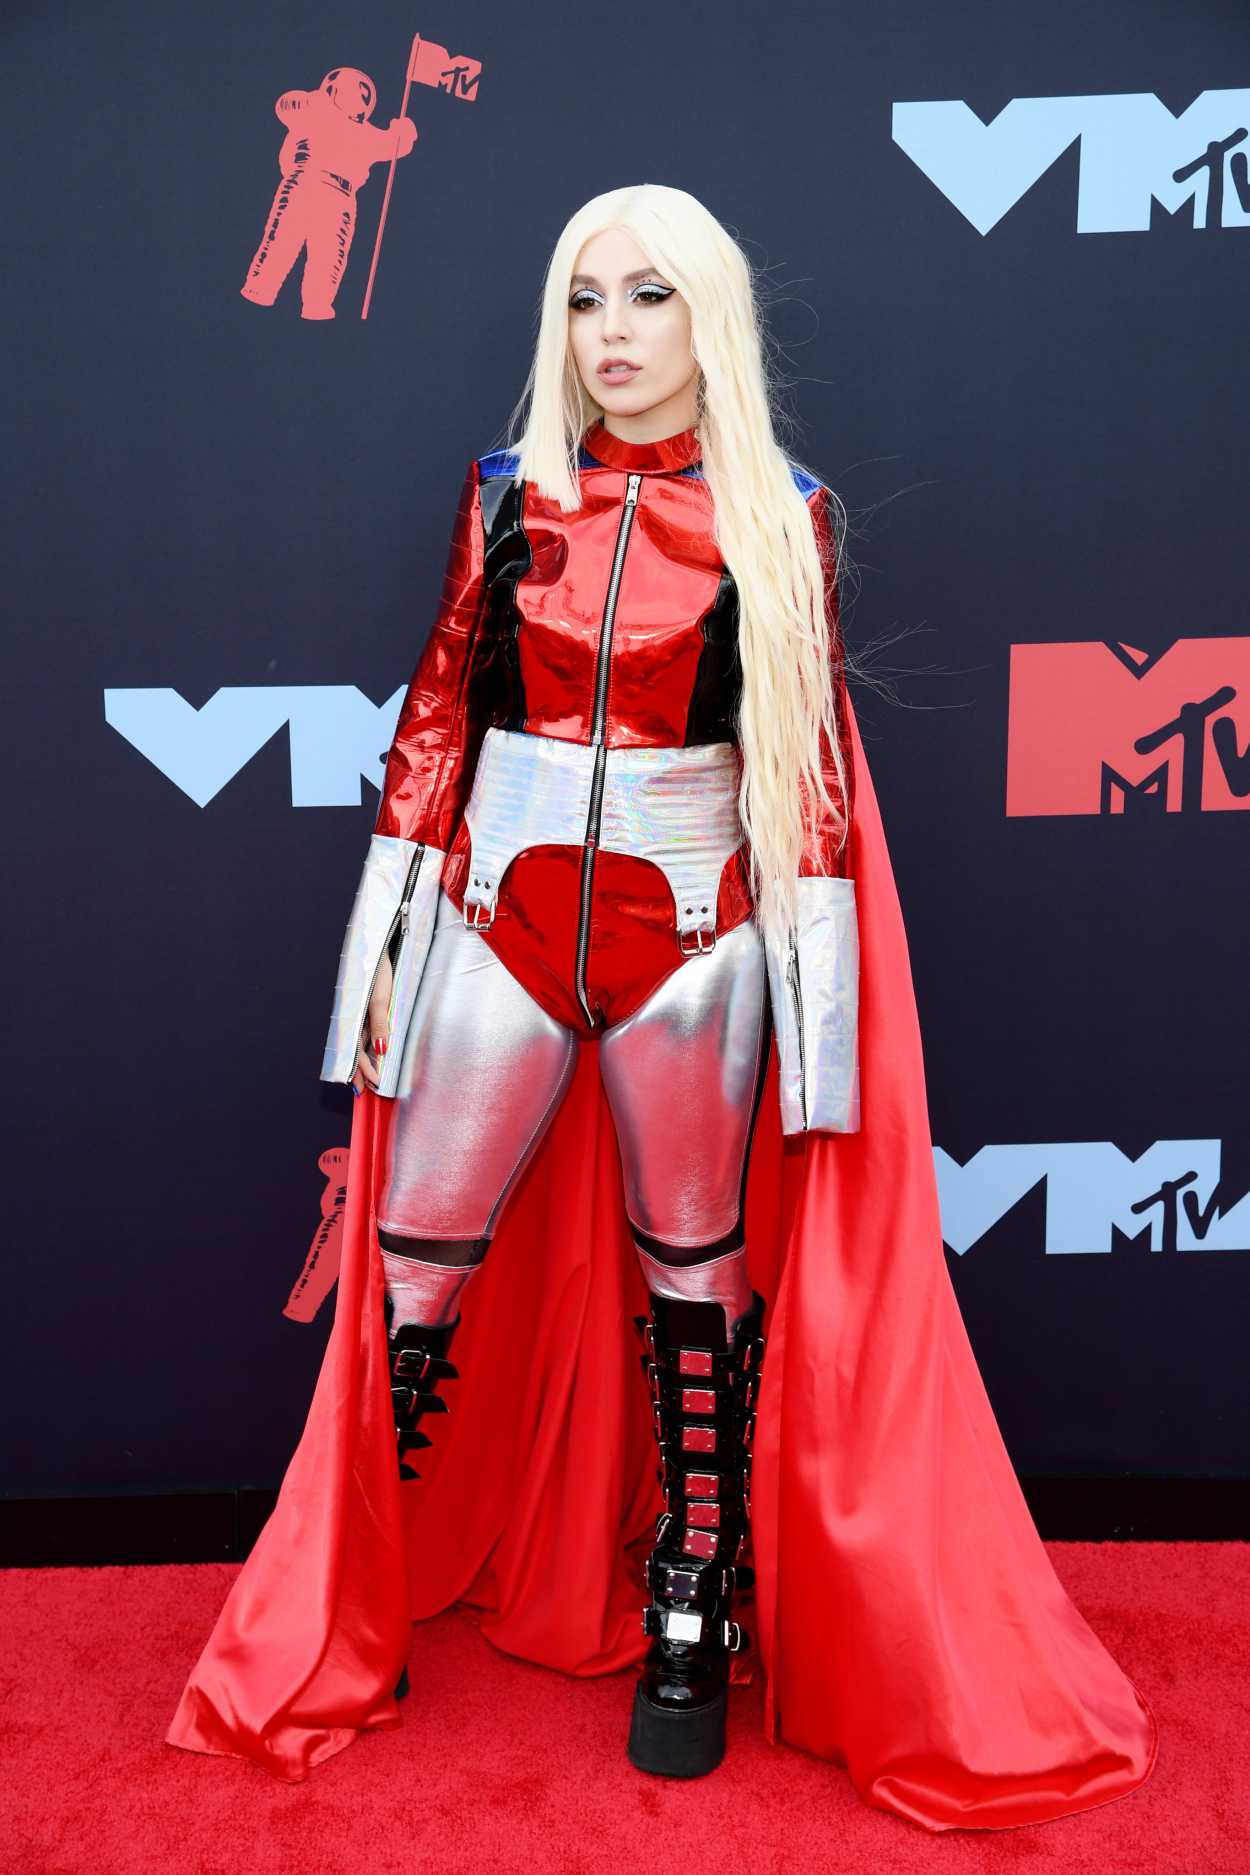 Ava Max Attends the 2019 MTV Video Music Awards at Prudential Center in